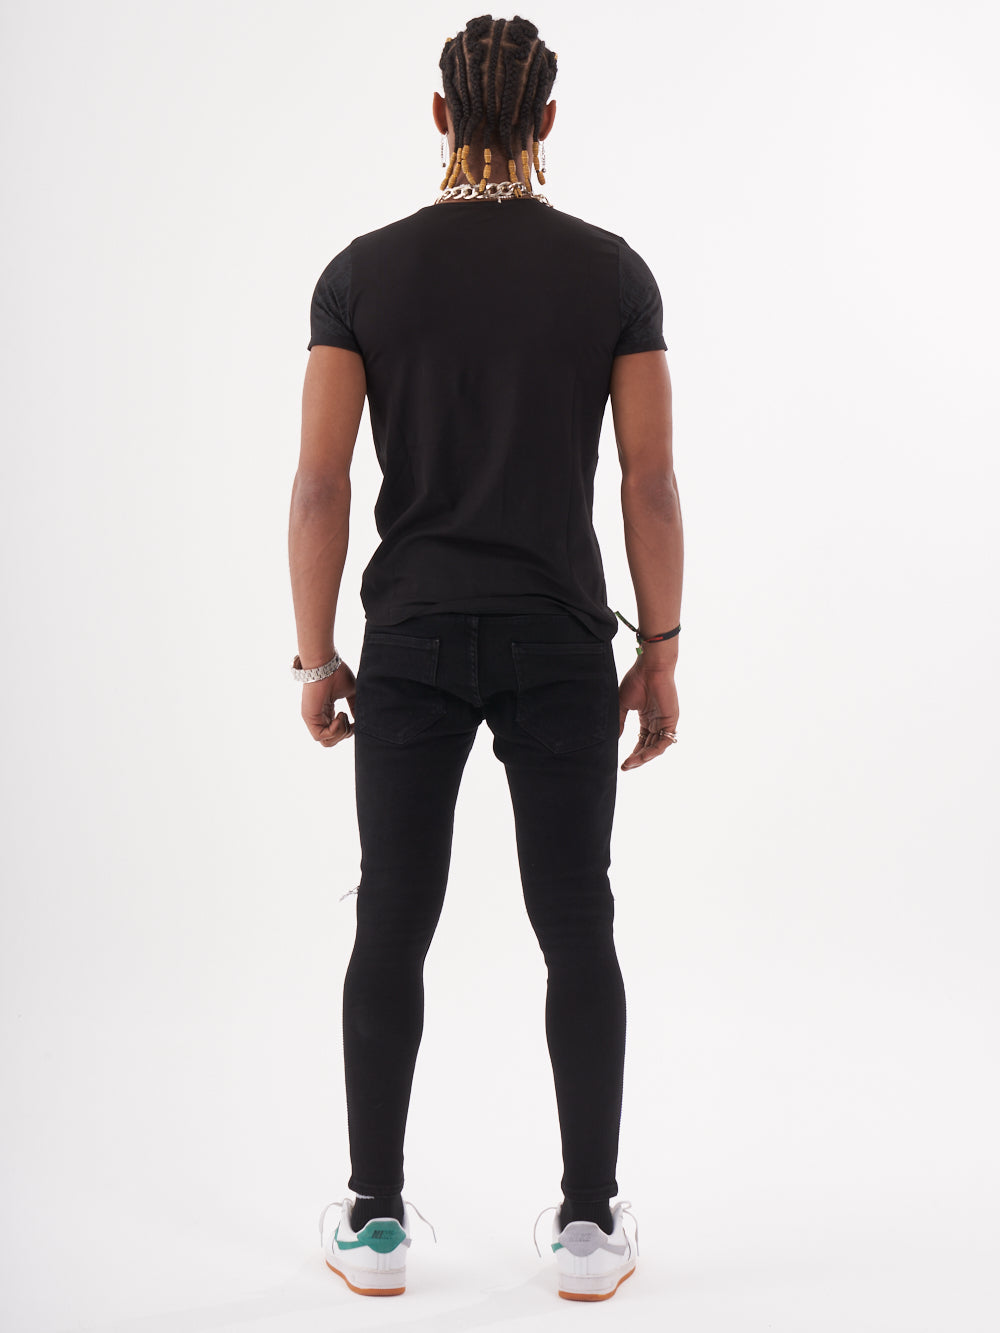 The back view of a man wearing a TRINITY T-SHIRT | BLACK and black jeans.